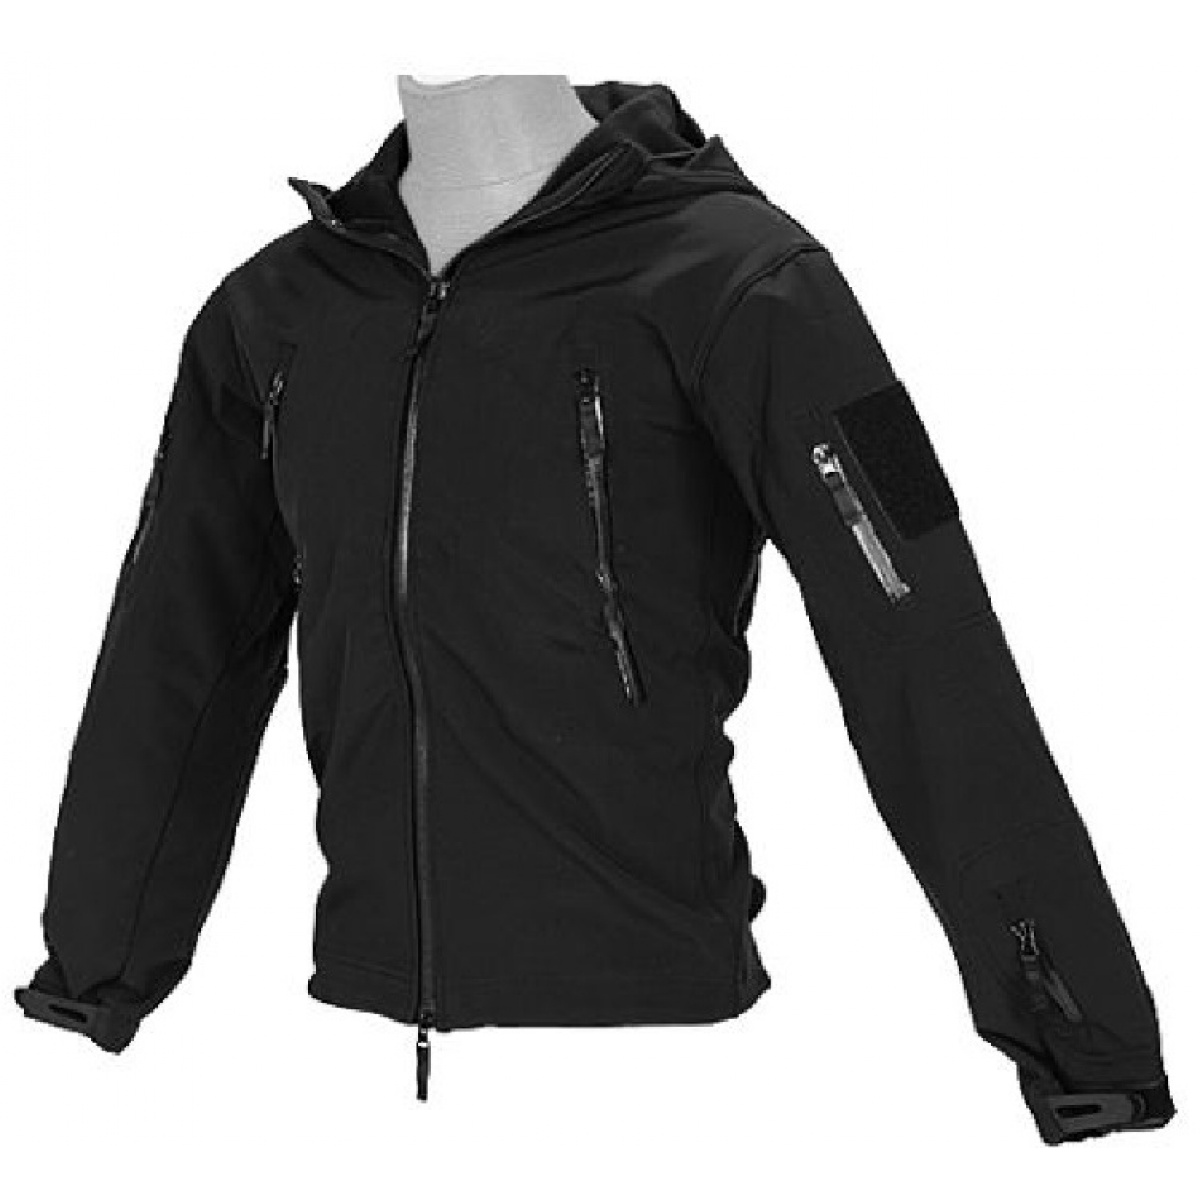 Lancer Tactical Airsoft Soft Shell Jacket w/ Hood - BLACK - SMALL ...